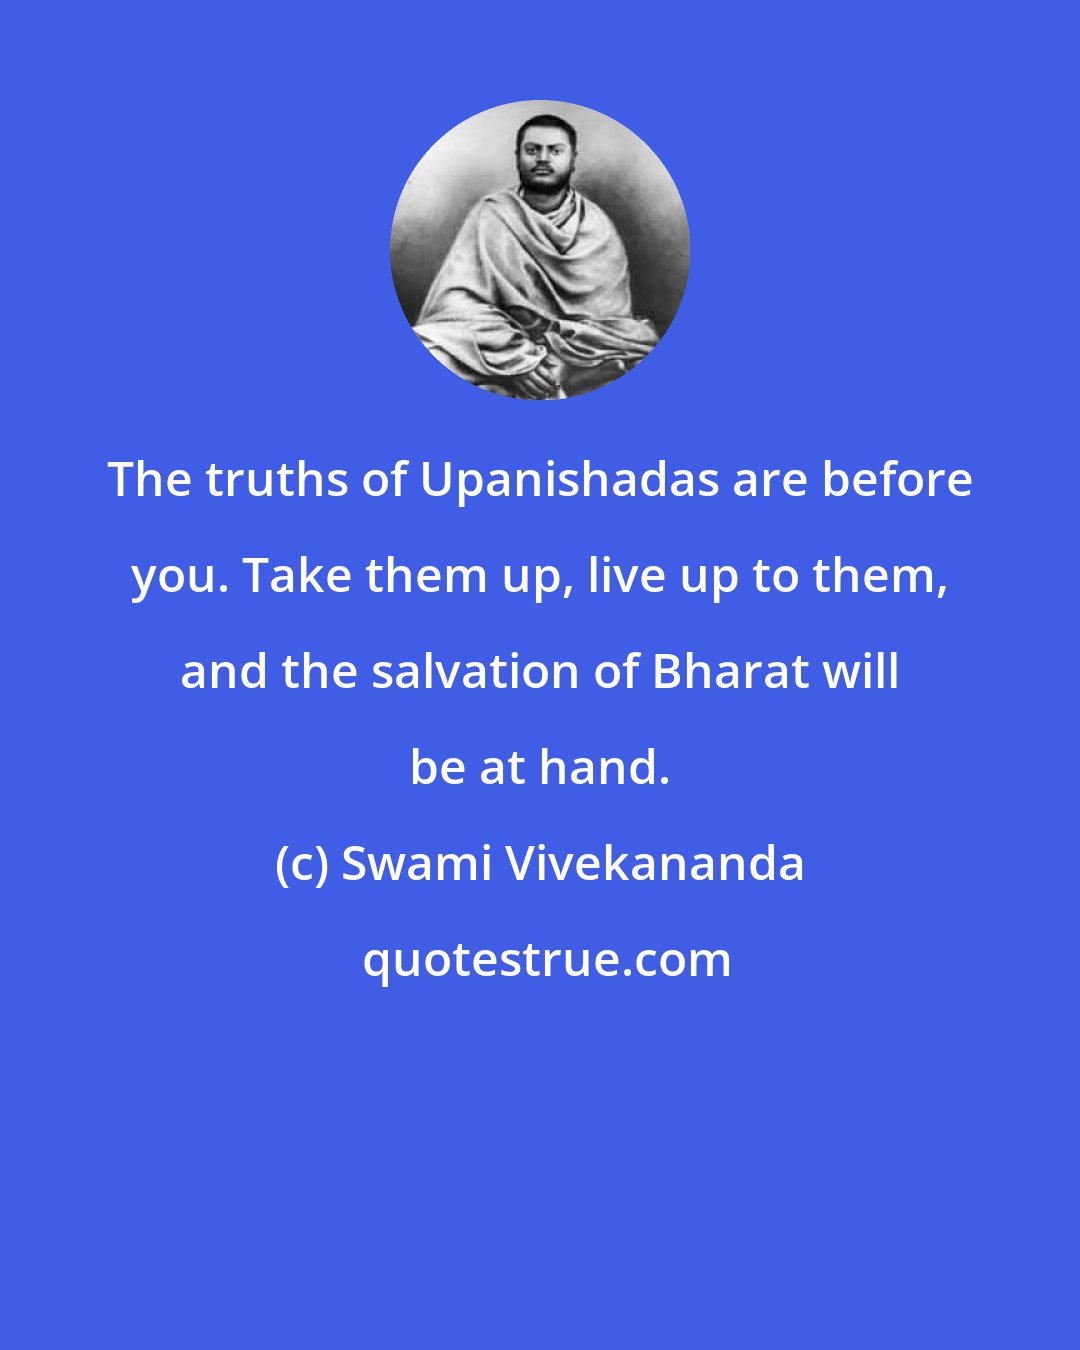 Swami Vivekananda: The truths of Upanishadas are before you. Take them up, live up to them, and the salvation of Bharat will be at hand.